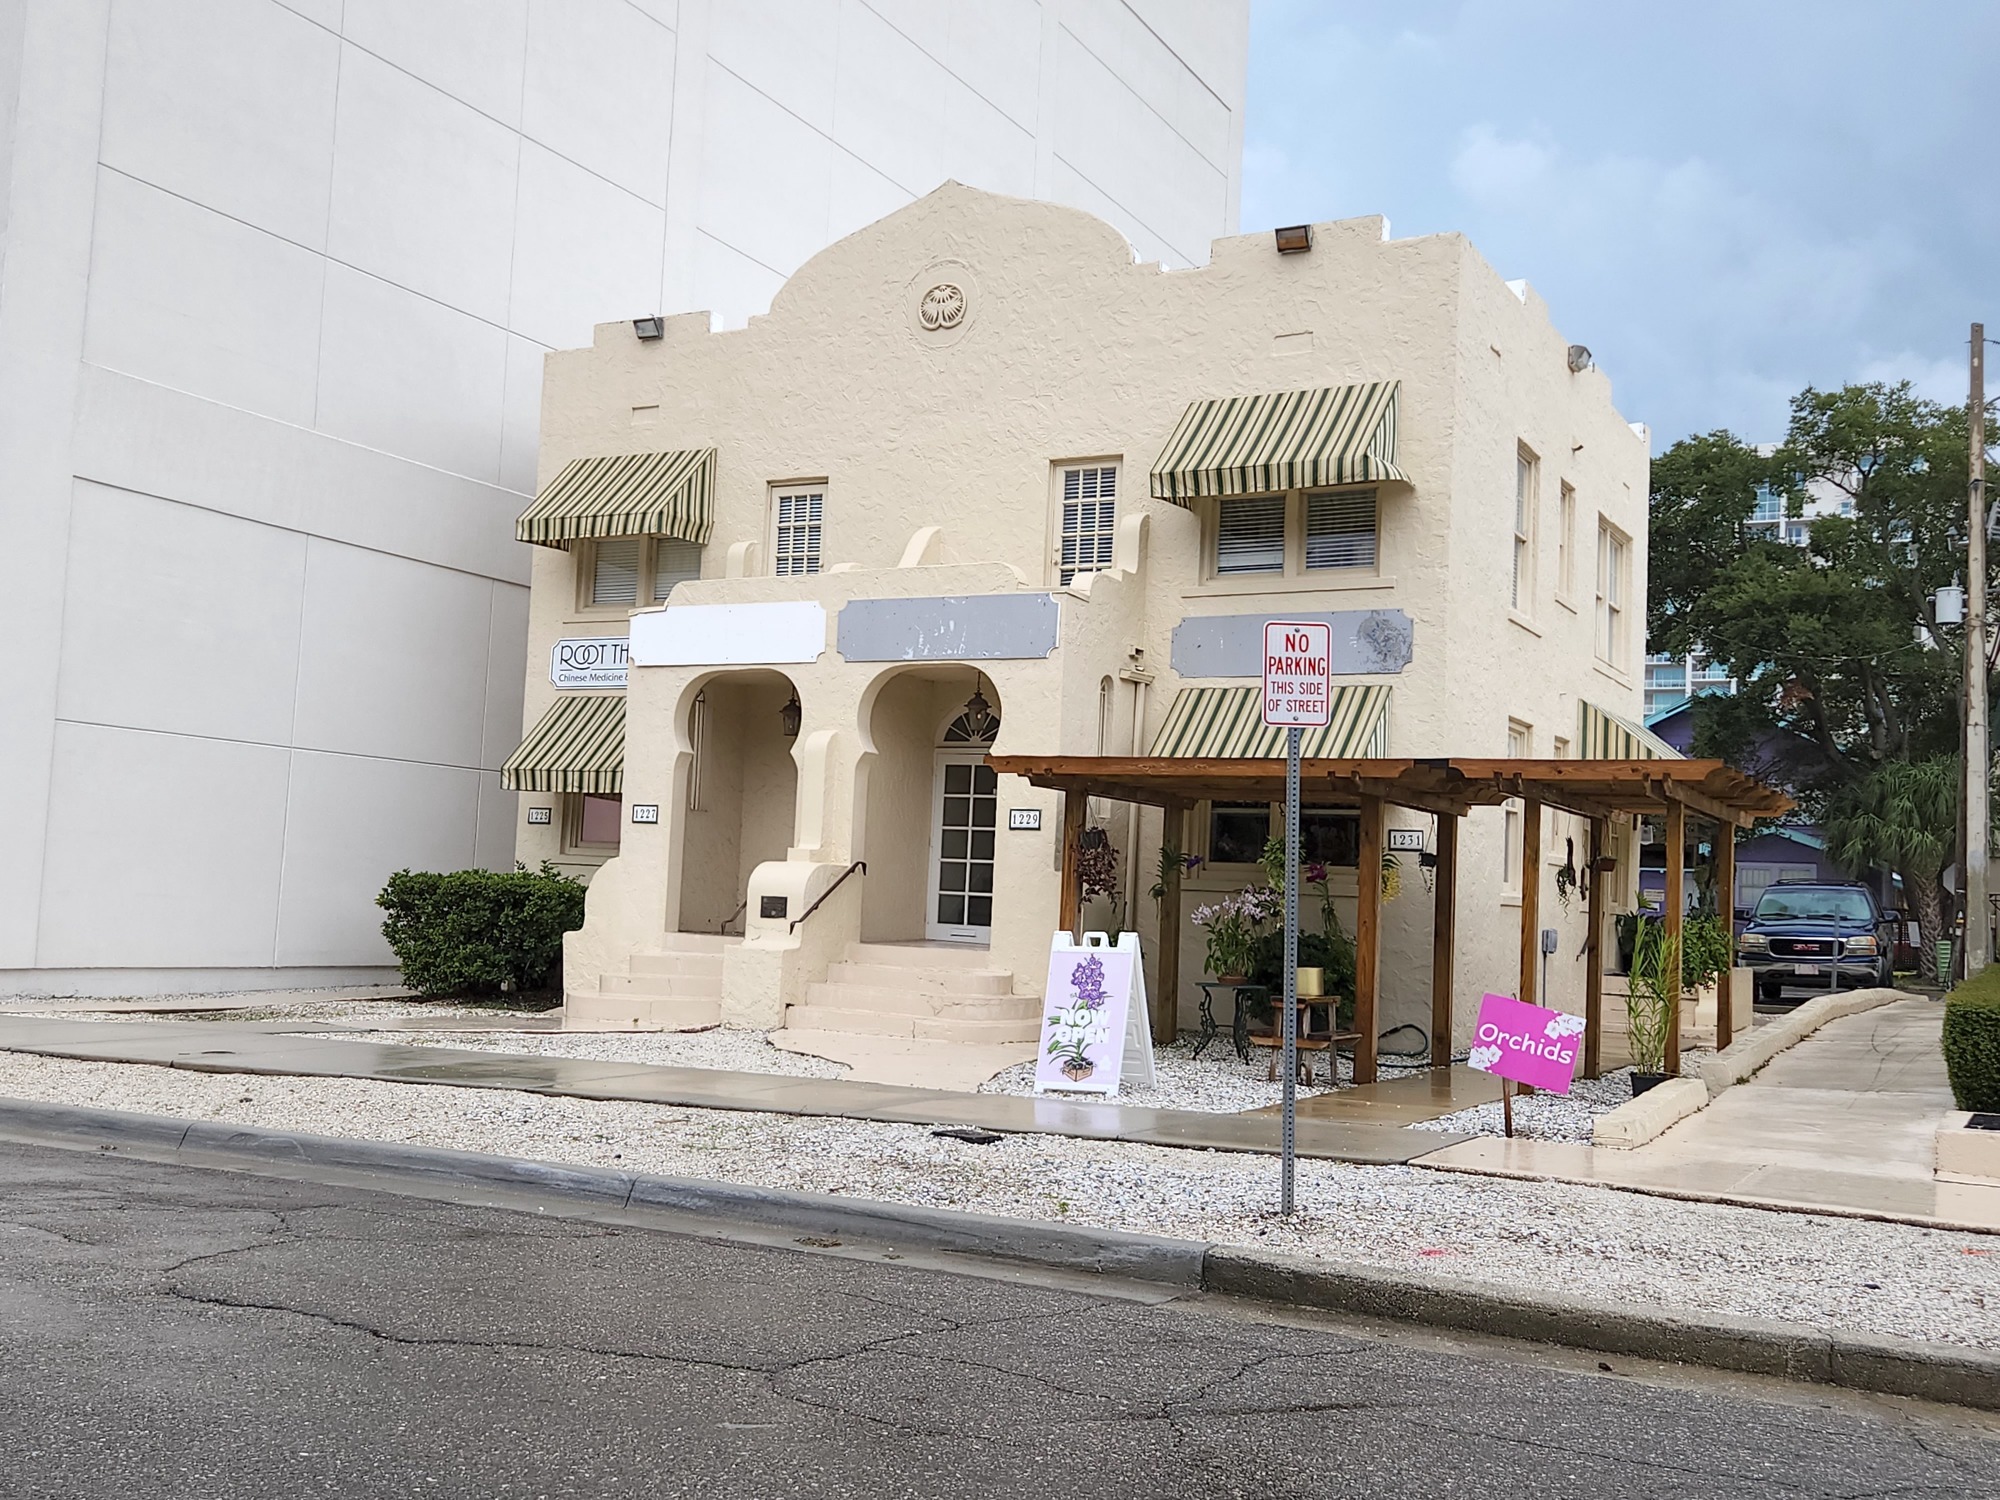 Sarasota City Commission approved the demolition of the Palm Apartments at 1225-1331 Second St., reversing a denial issued by the Historic Preservation Board. (Andrew Warfield)